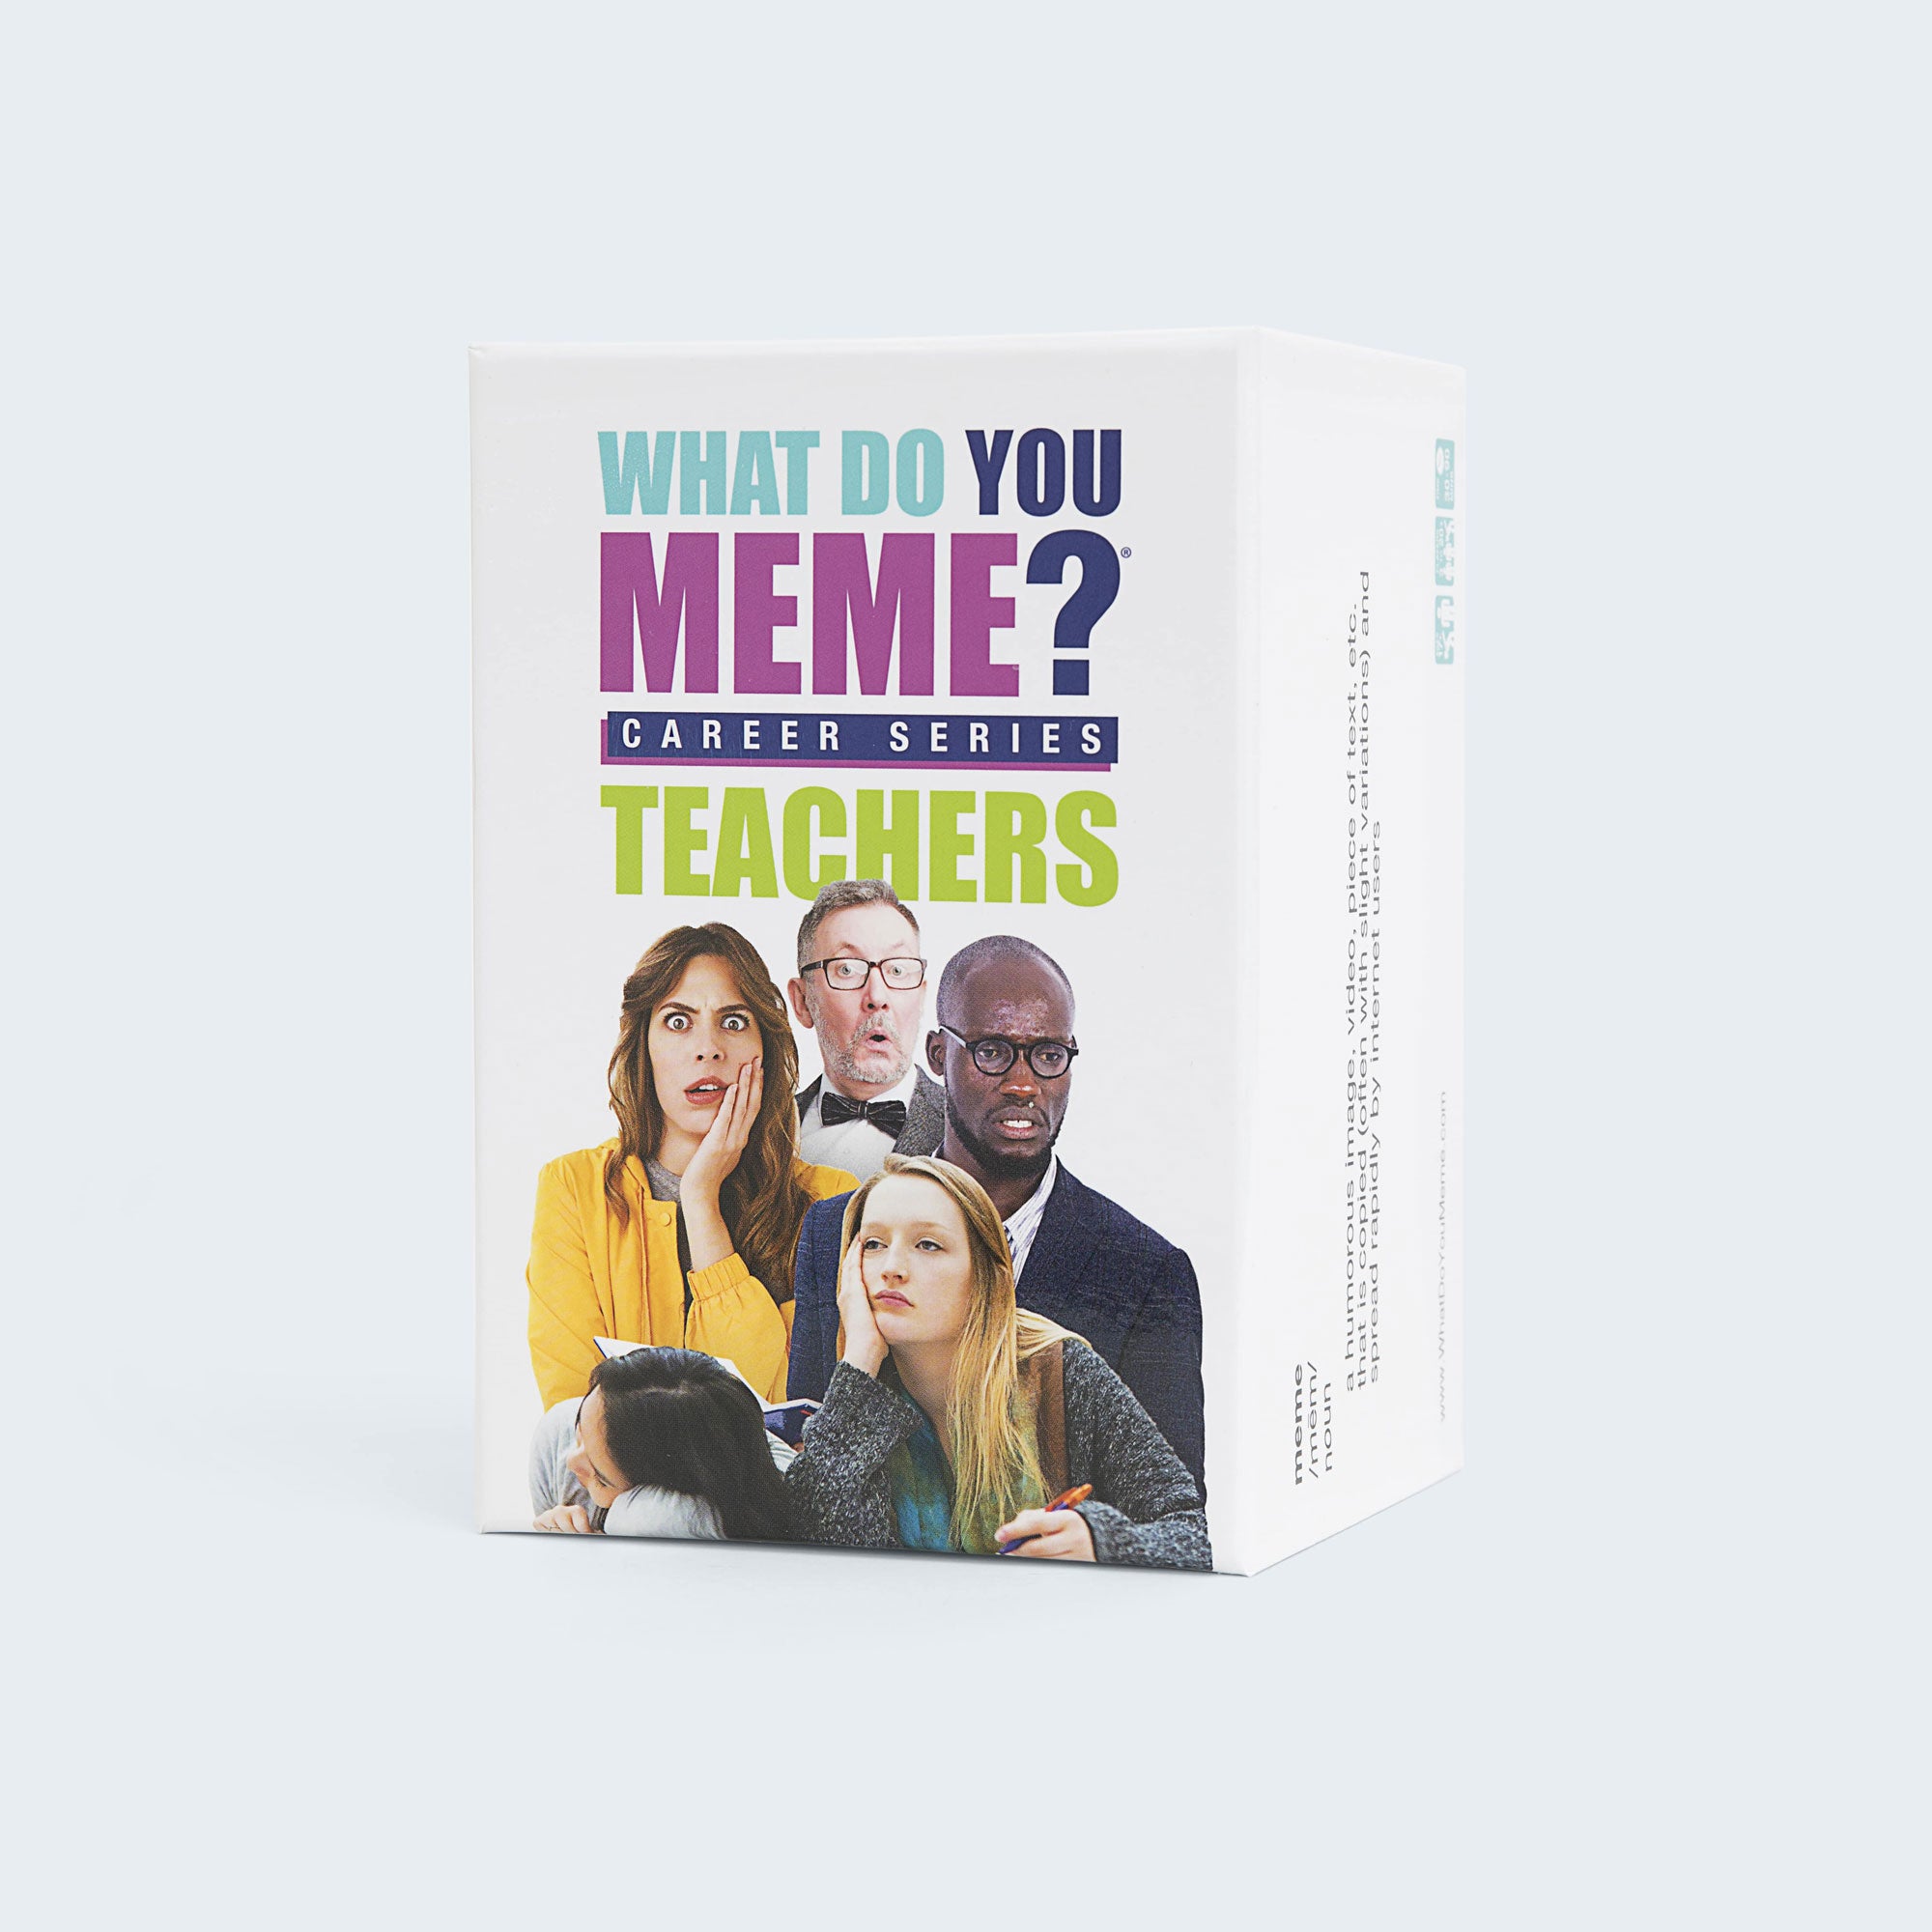 what-do-you-meme-career-series-teachers-game-box-and-game-play-03-what-do-you-meme-by-relatable